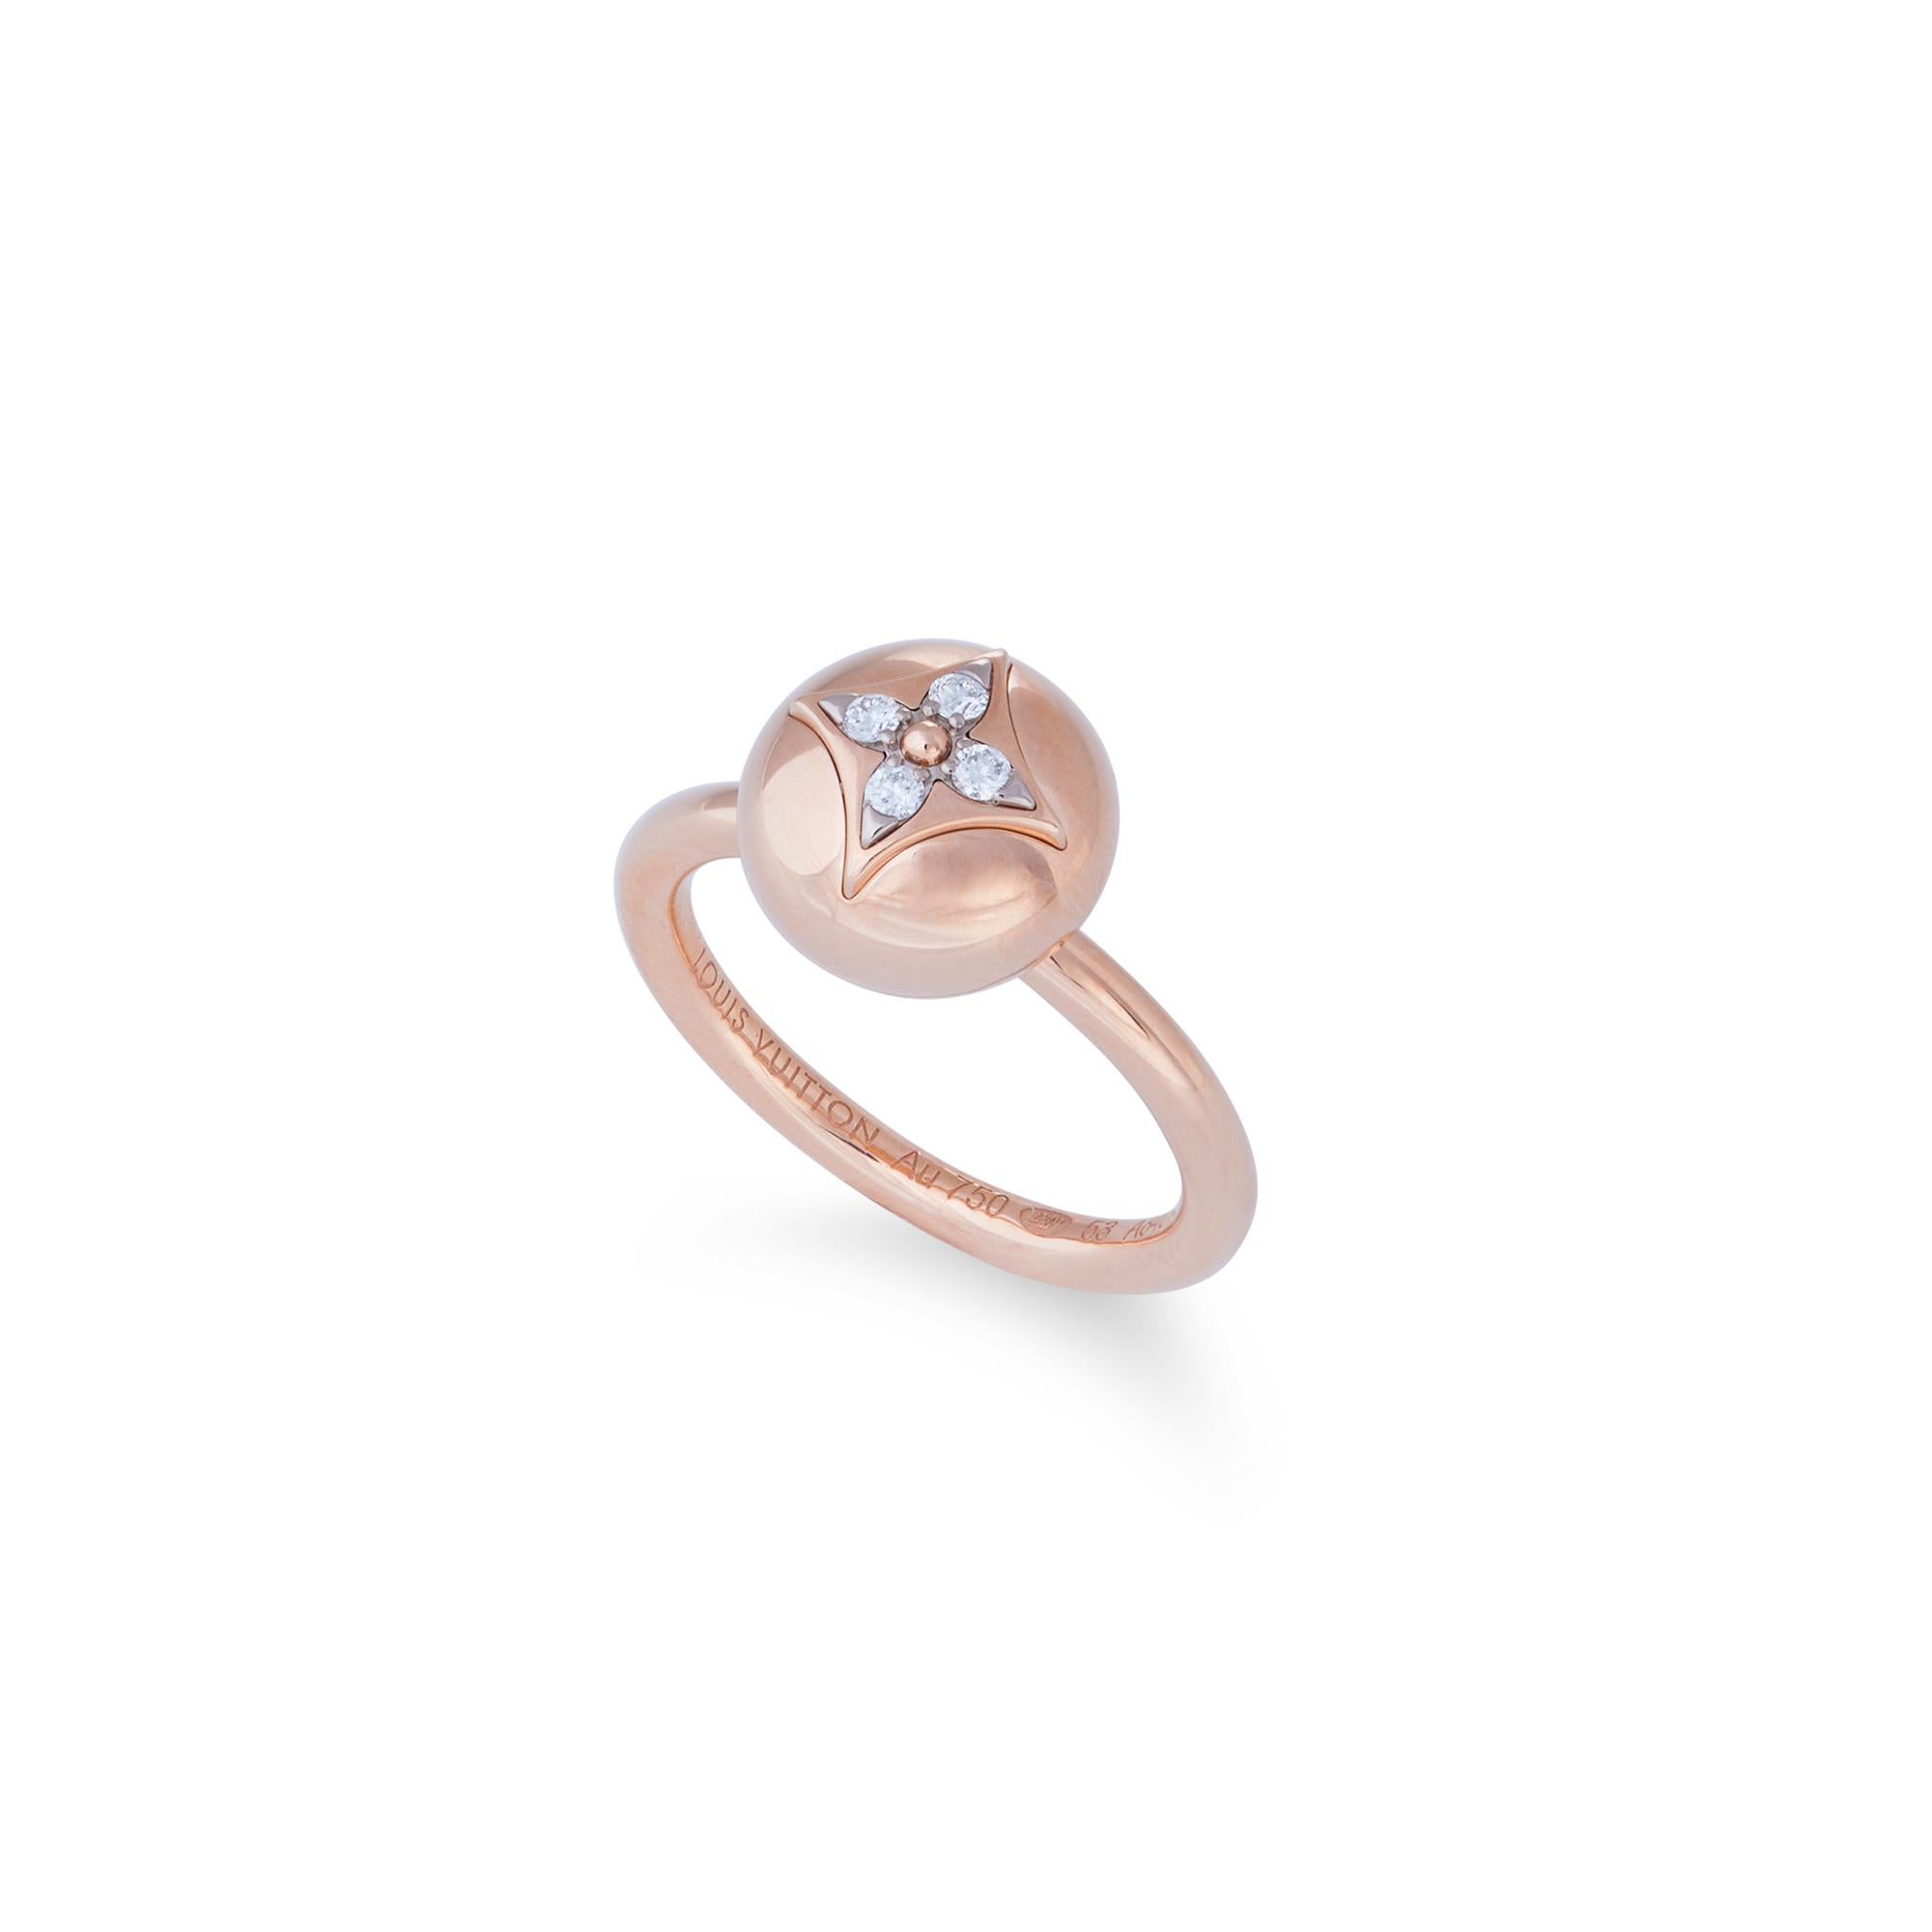 Authentic Louis Vuitton B Blossom ring crafted in 18 karat rose and white gold.  The iconic Louis Vuitton monogram flower is adorned with four stunning round brilliant cut diamonds of approximately 0.07 carats total weight.  Size 53, US size 6 1/4. 